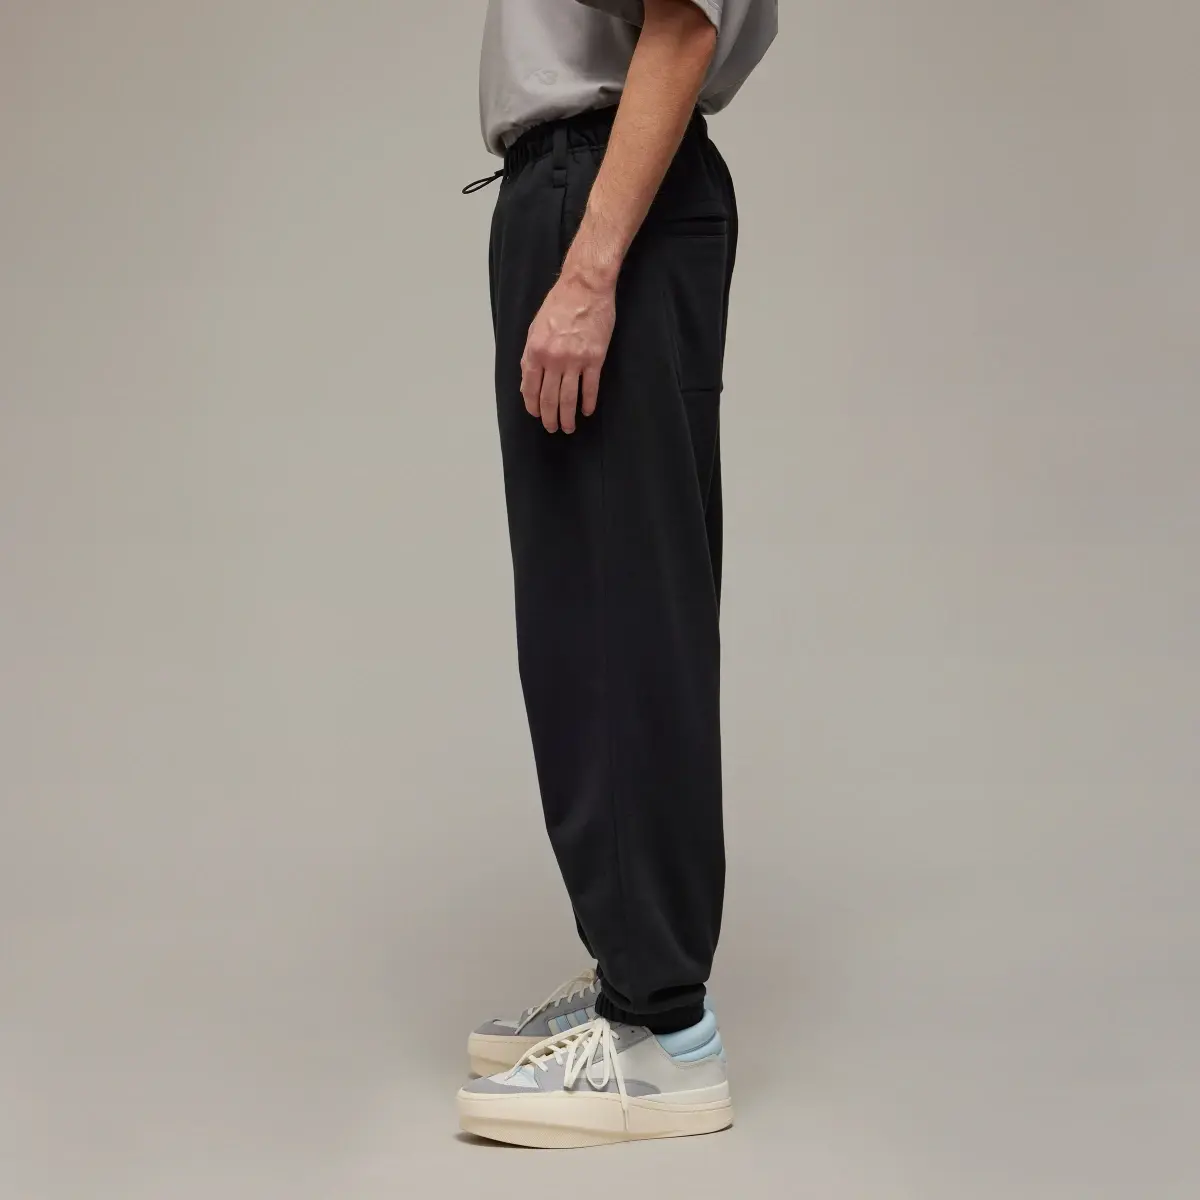 Adidas Y-3 French Terry Track Pants. 2